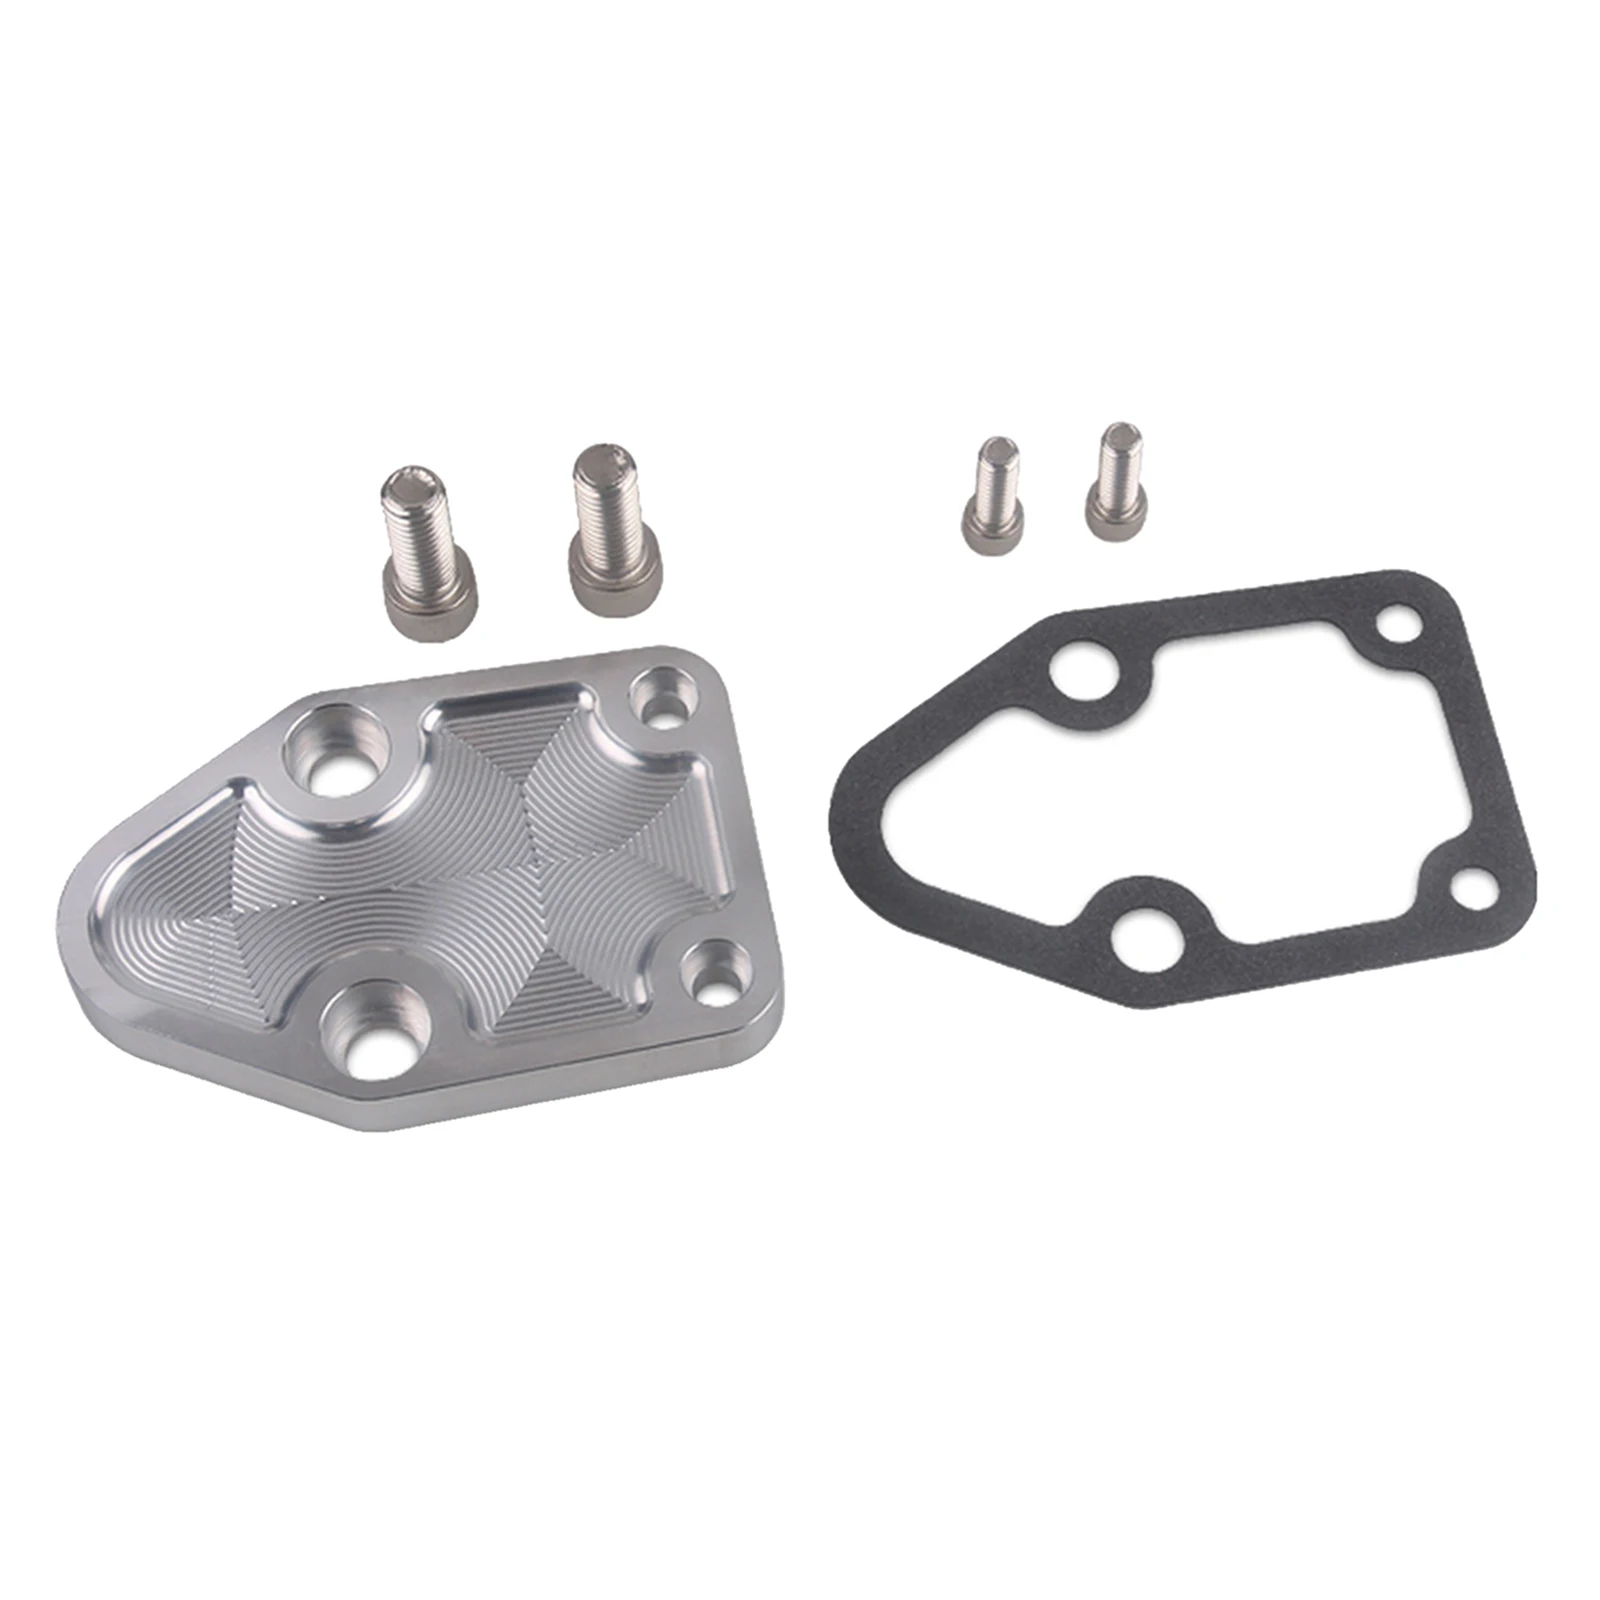 Fuel Pump Plate Set with Seal for CHEVY 283 305 327 350 383 400